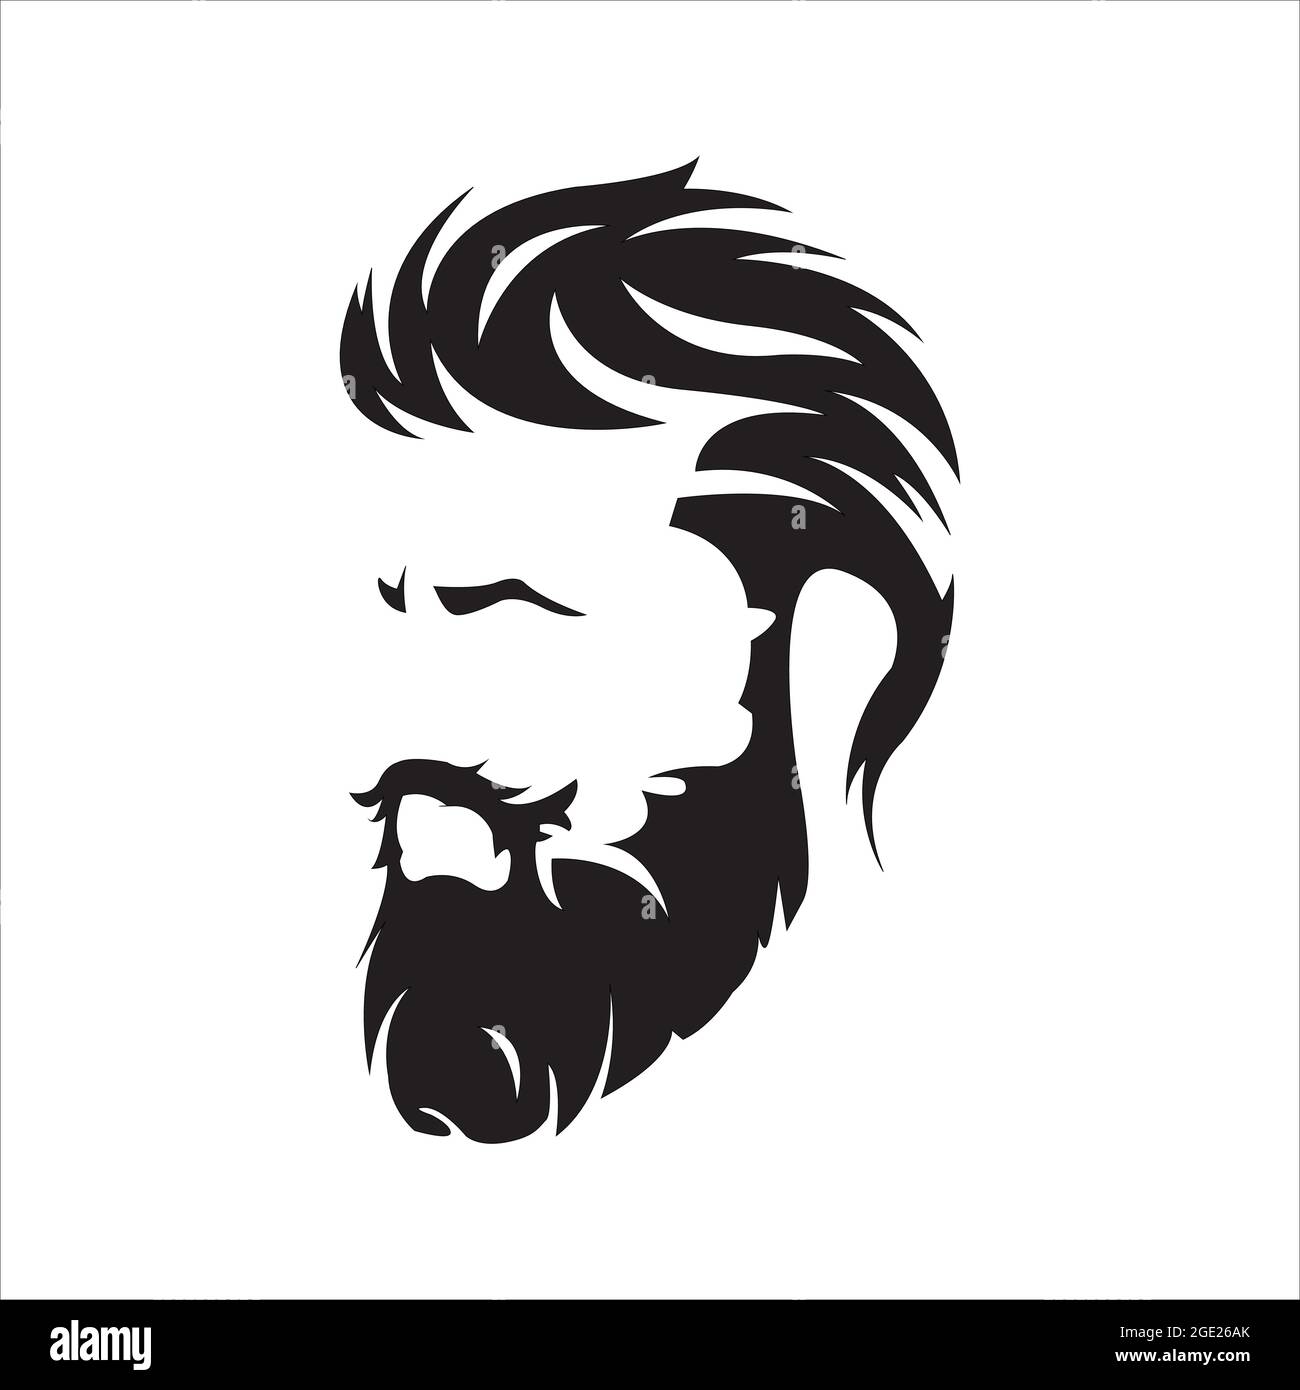 26,584 Man Hairstyle Logo Images, Stock Photos & Vectors | Shutterstock